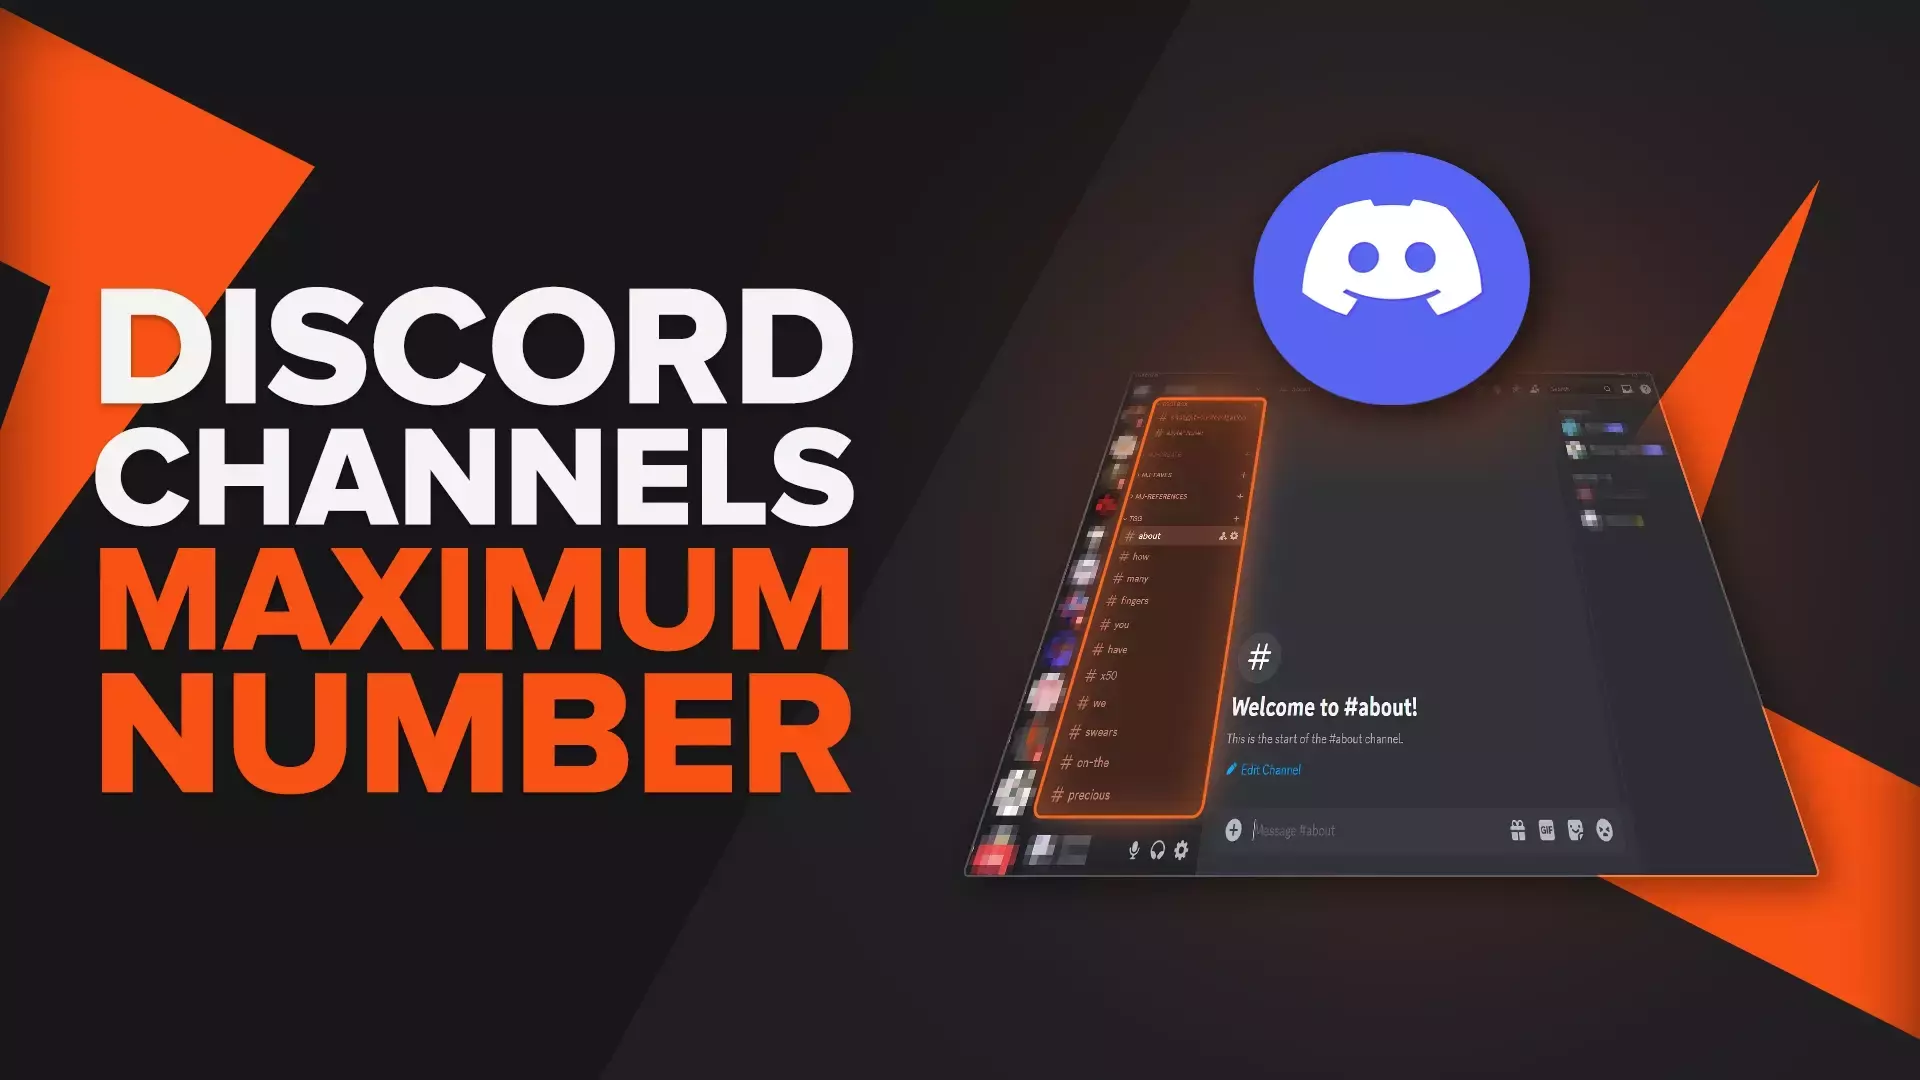 How Many Channels Can A Discord Server Have? [Answered]